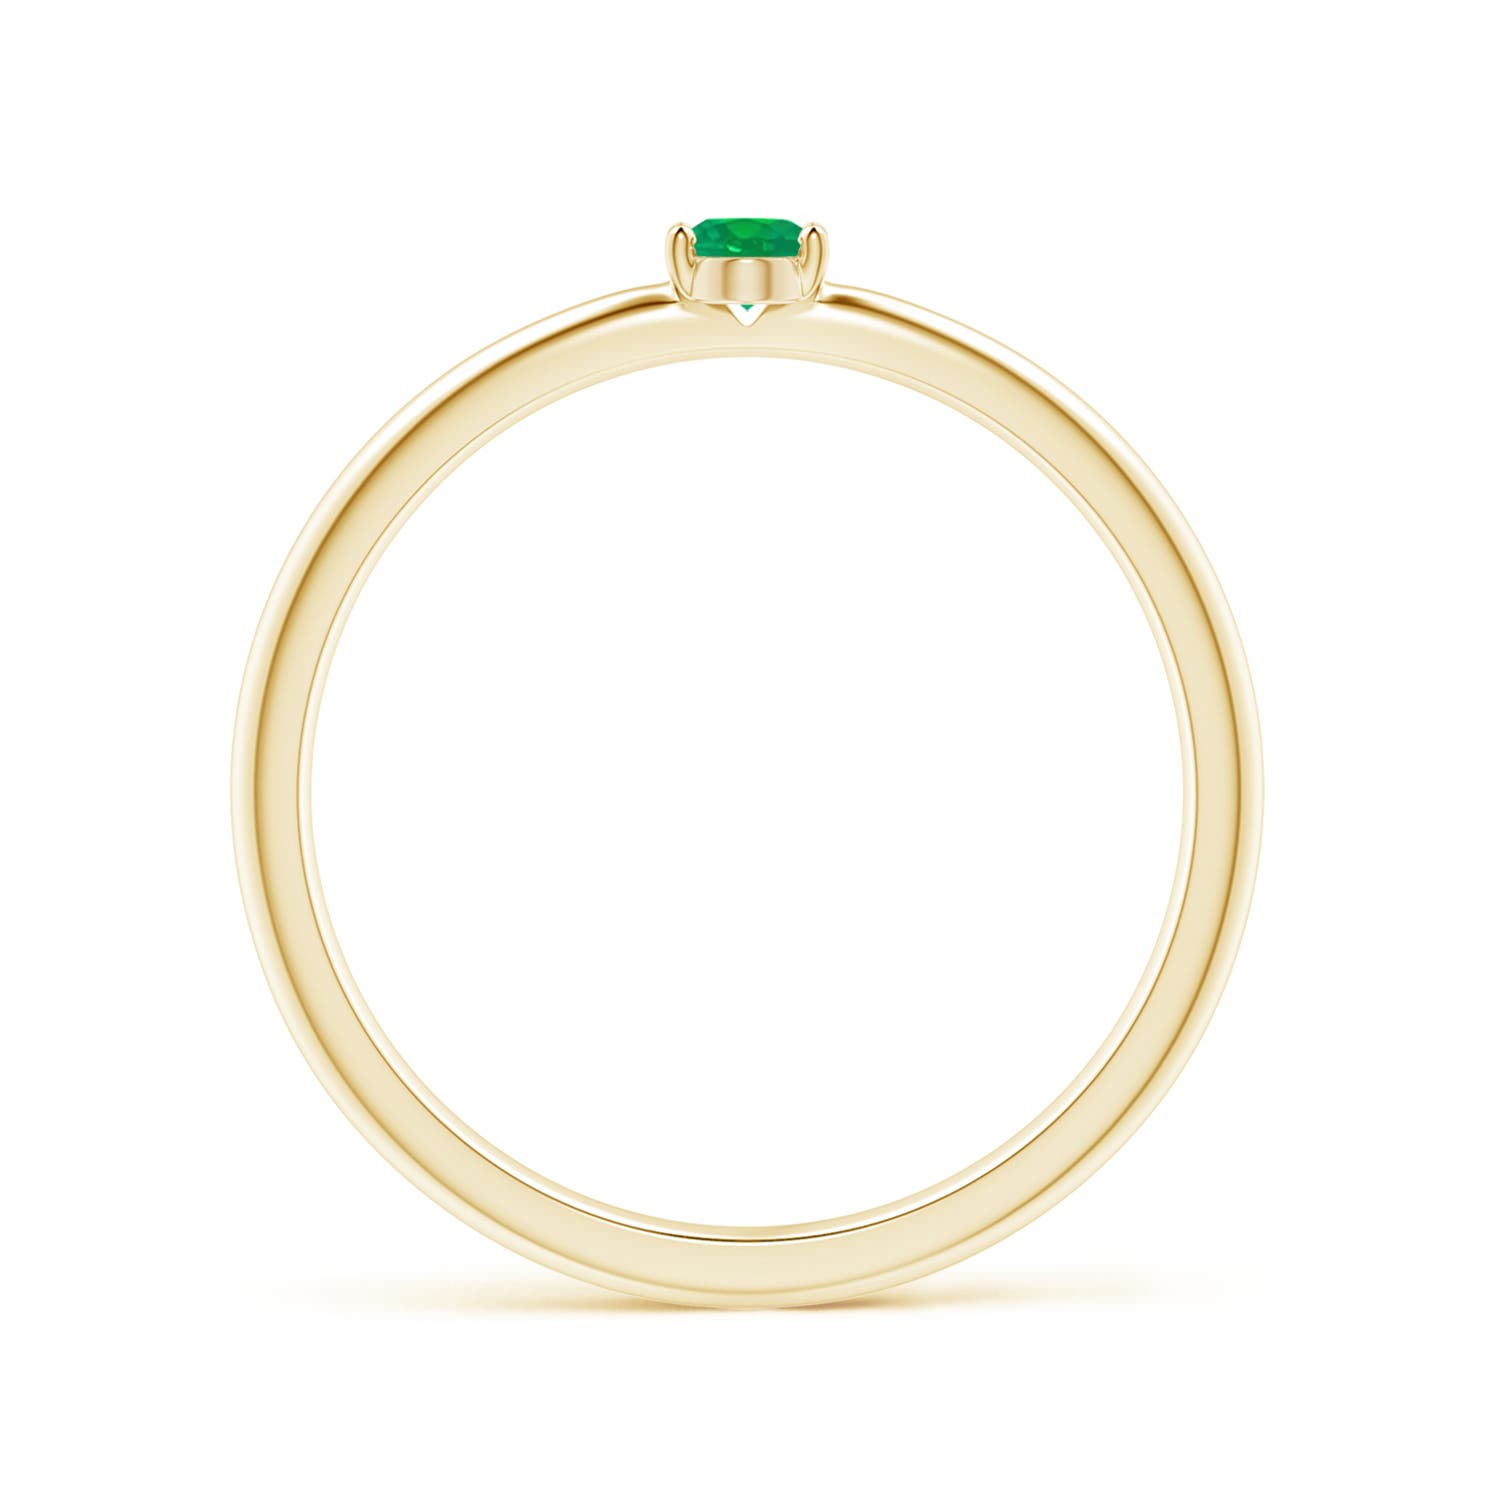 AA - Emerald / 0.12 CT / 14 KT Yellow Gold